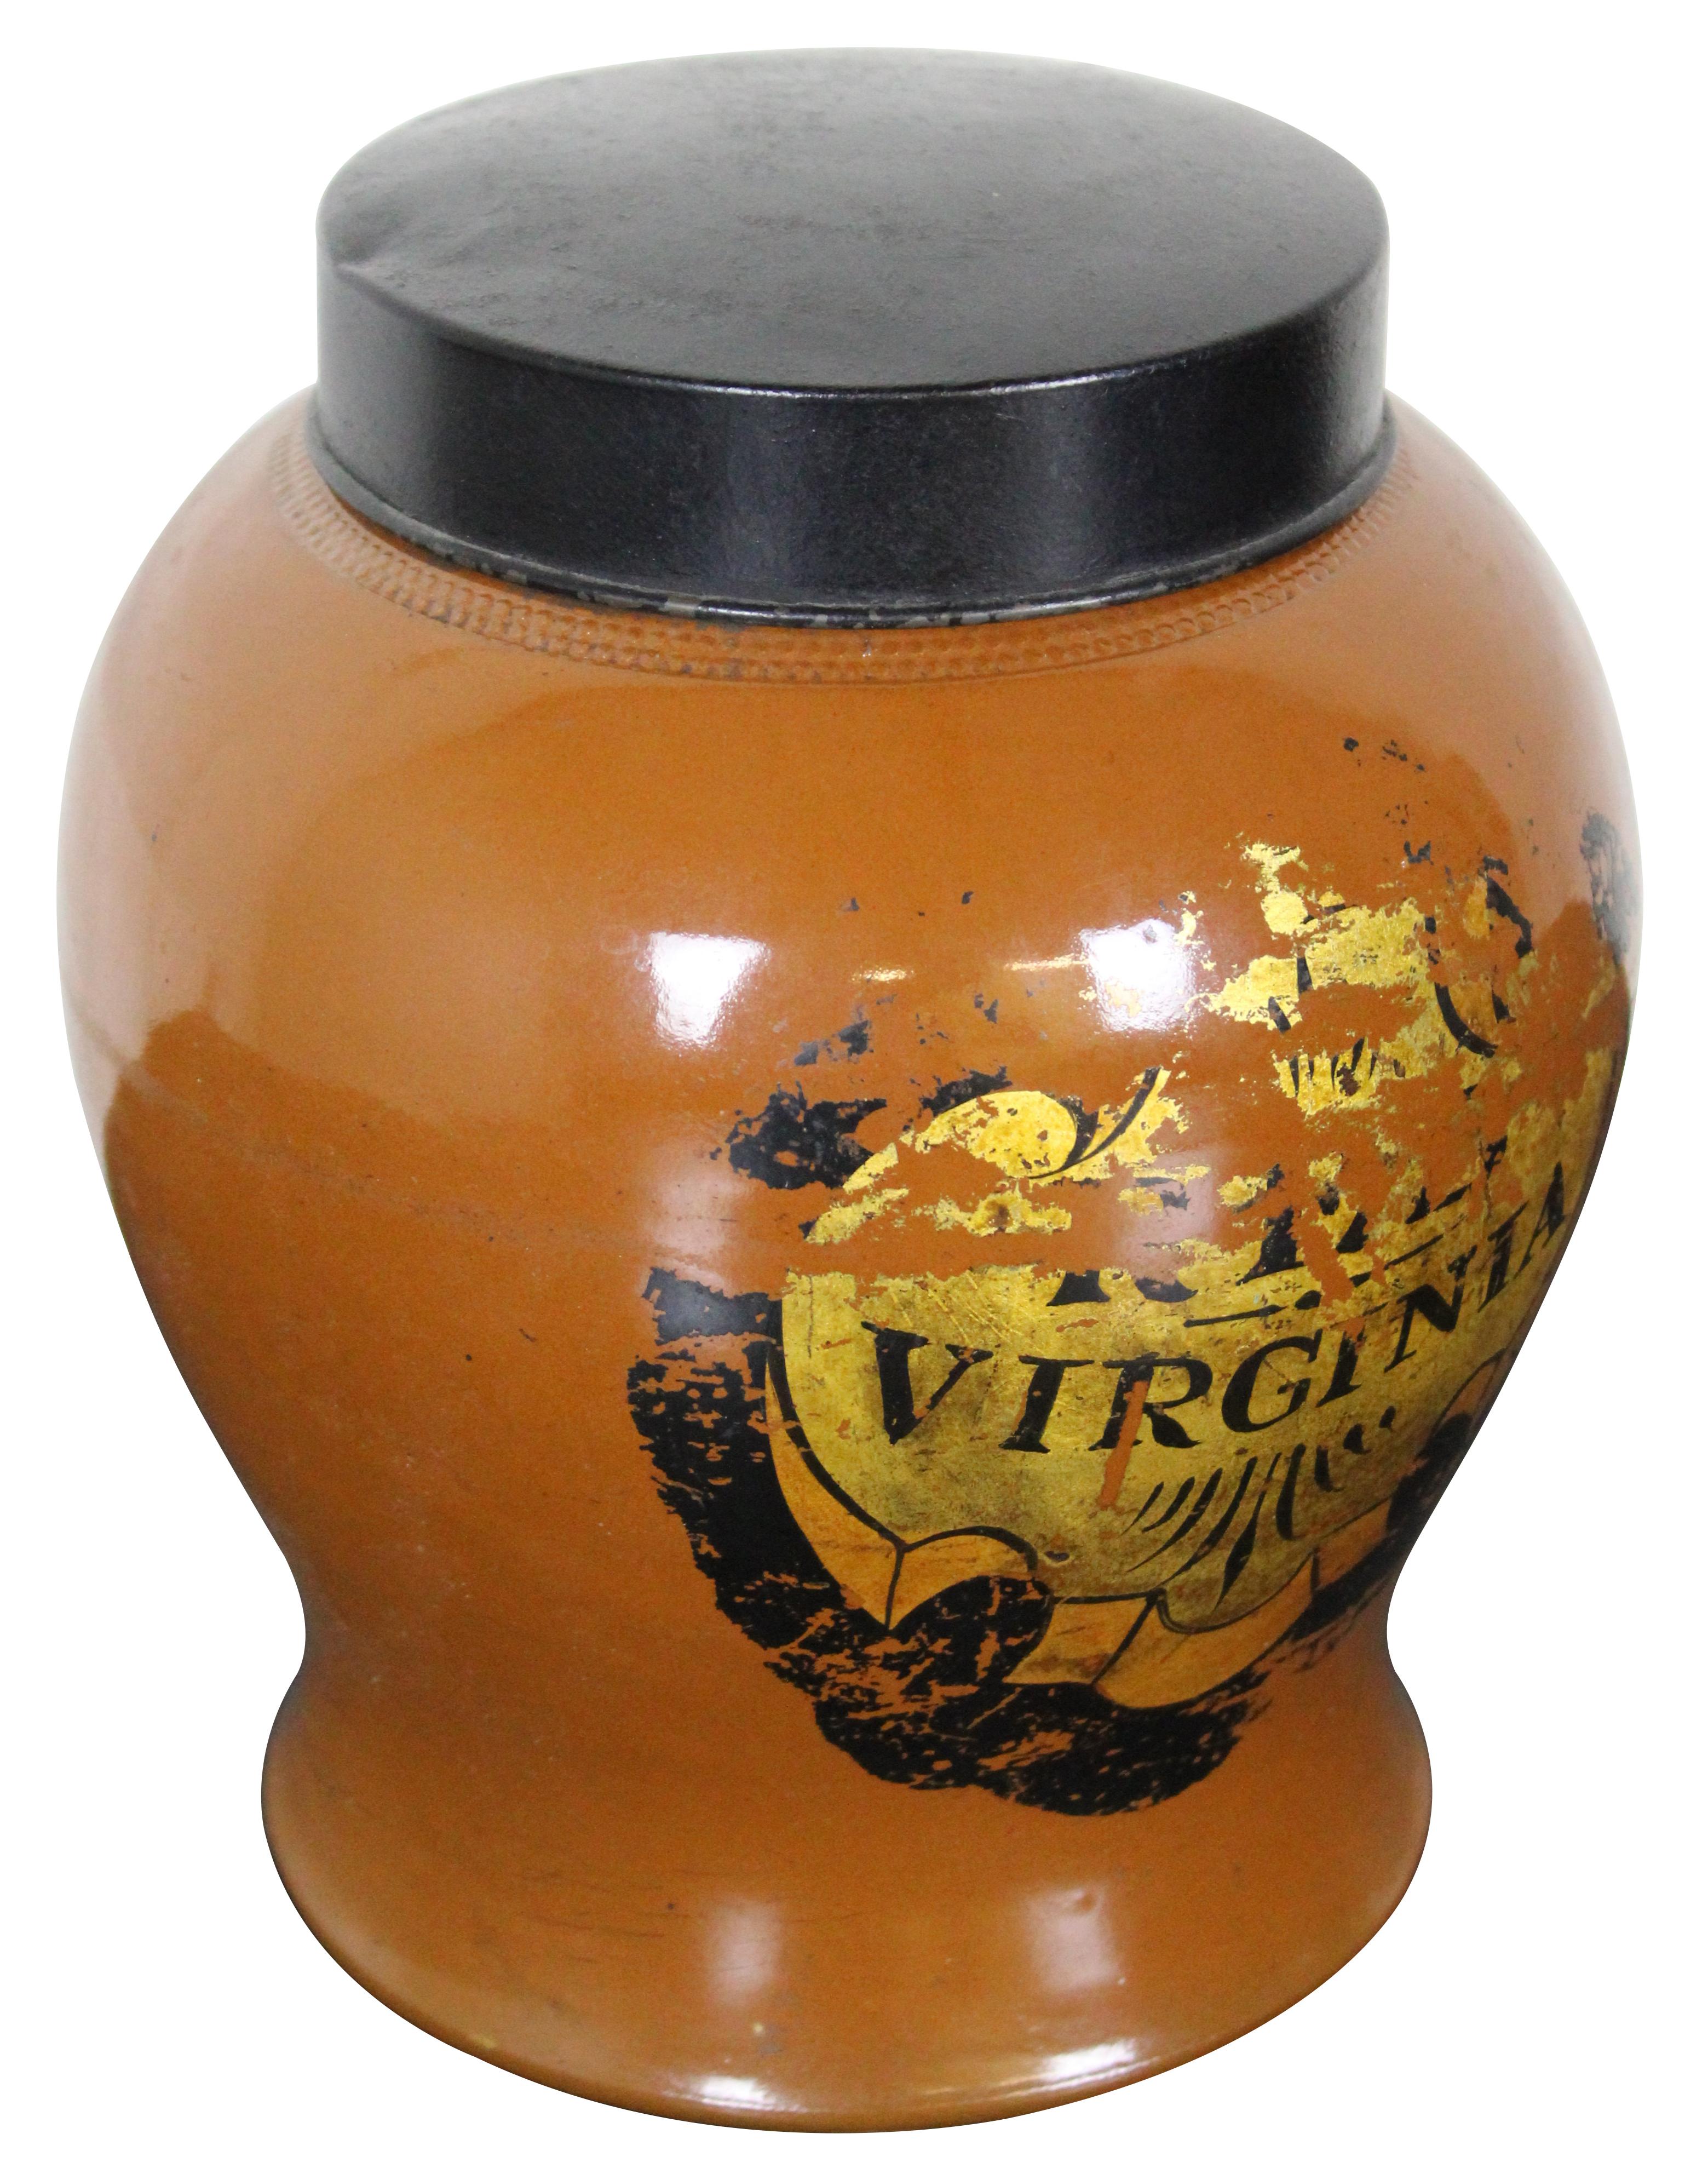 Rare antique English Victorian apotheary tobacco jar / tea caddy produced by H. F. & S London, in an orange-brown glazed pottery with Virginia on the front, and a black metal lid.
 